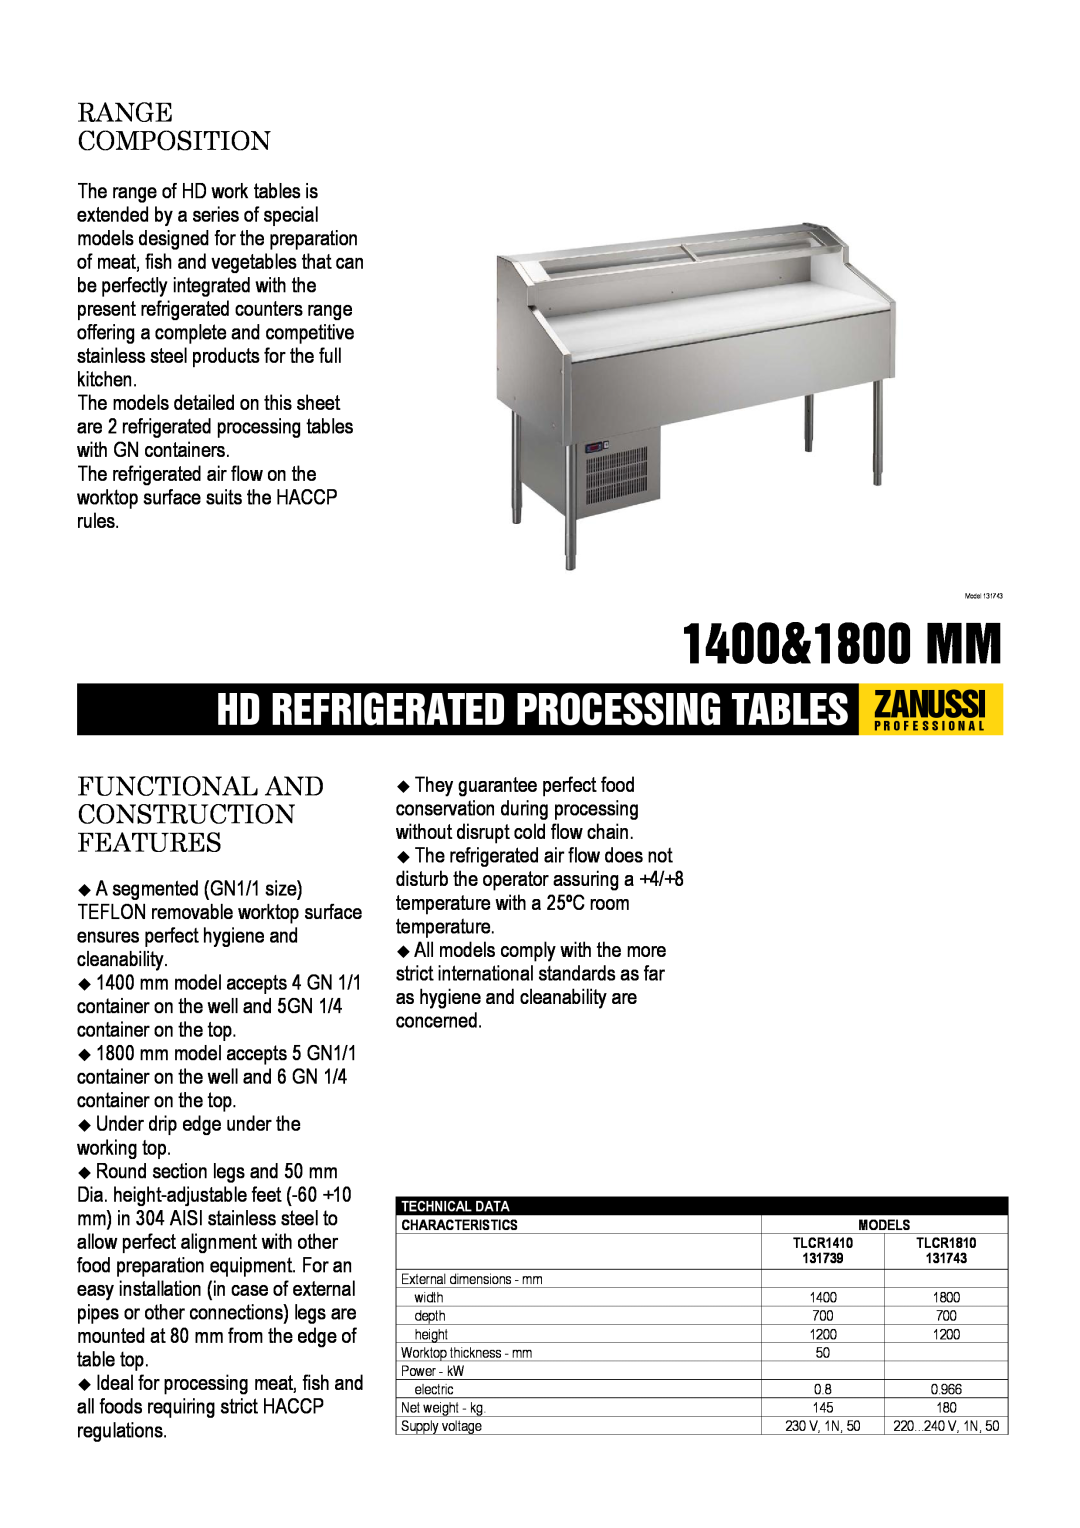 Zanussi 131743, 131739, TLCR1410, TLCR1810 dimensions 1400&1800 MM, Range Composition, Functional And Construction Features 